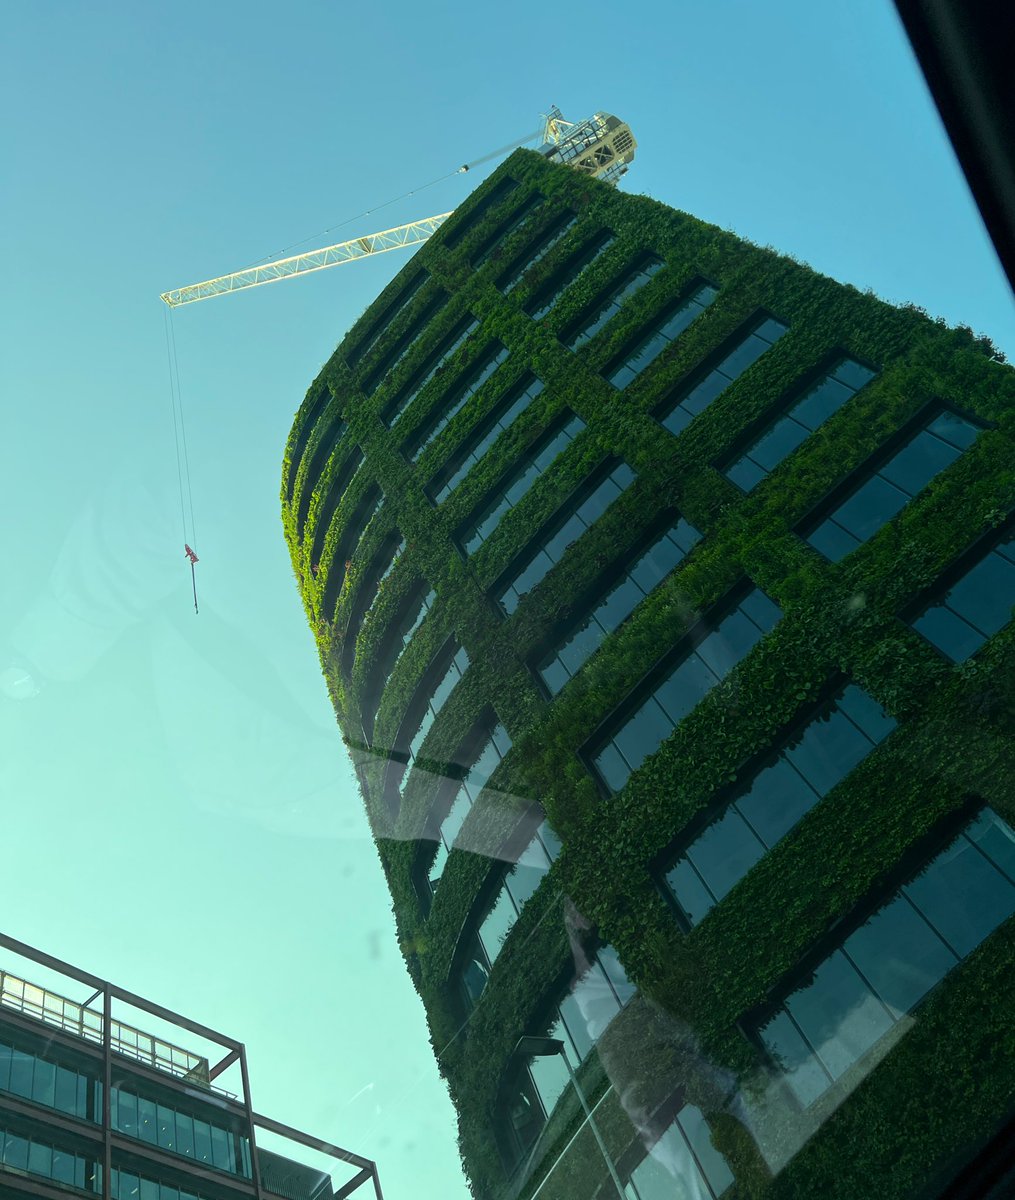 My early morning view through my car sun roof. I loved working on this project: and now I enjoy watching it (literally)grow everyday. @EdenNewBailey @SalfordCouncil #Salford #carshare with @RichardAPaxton